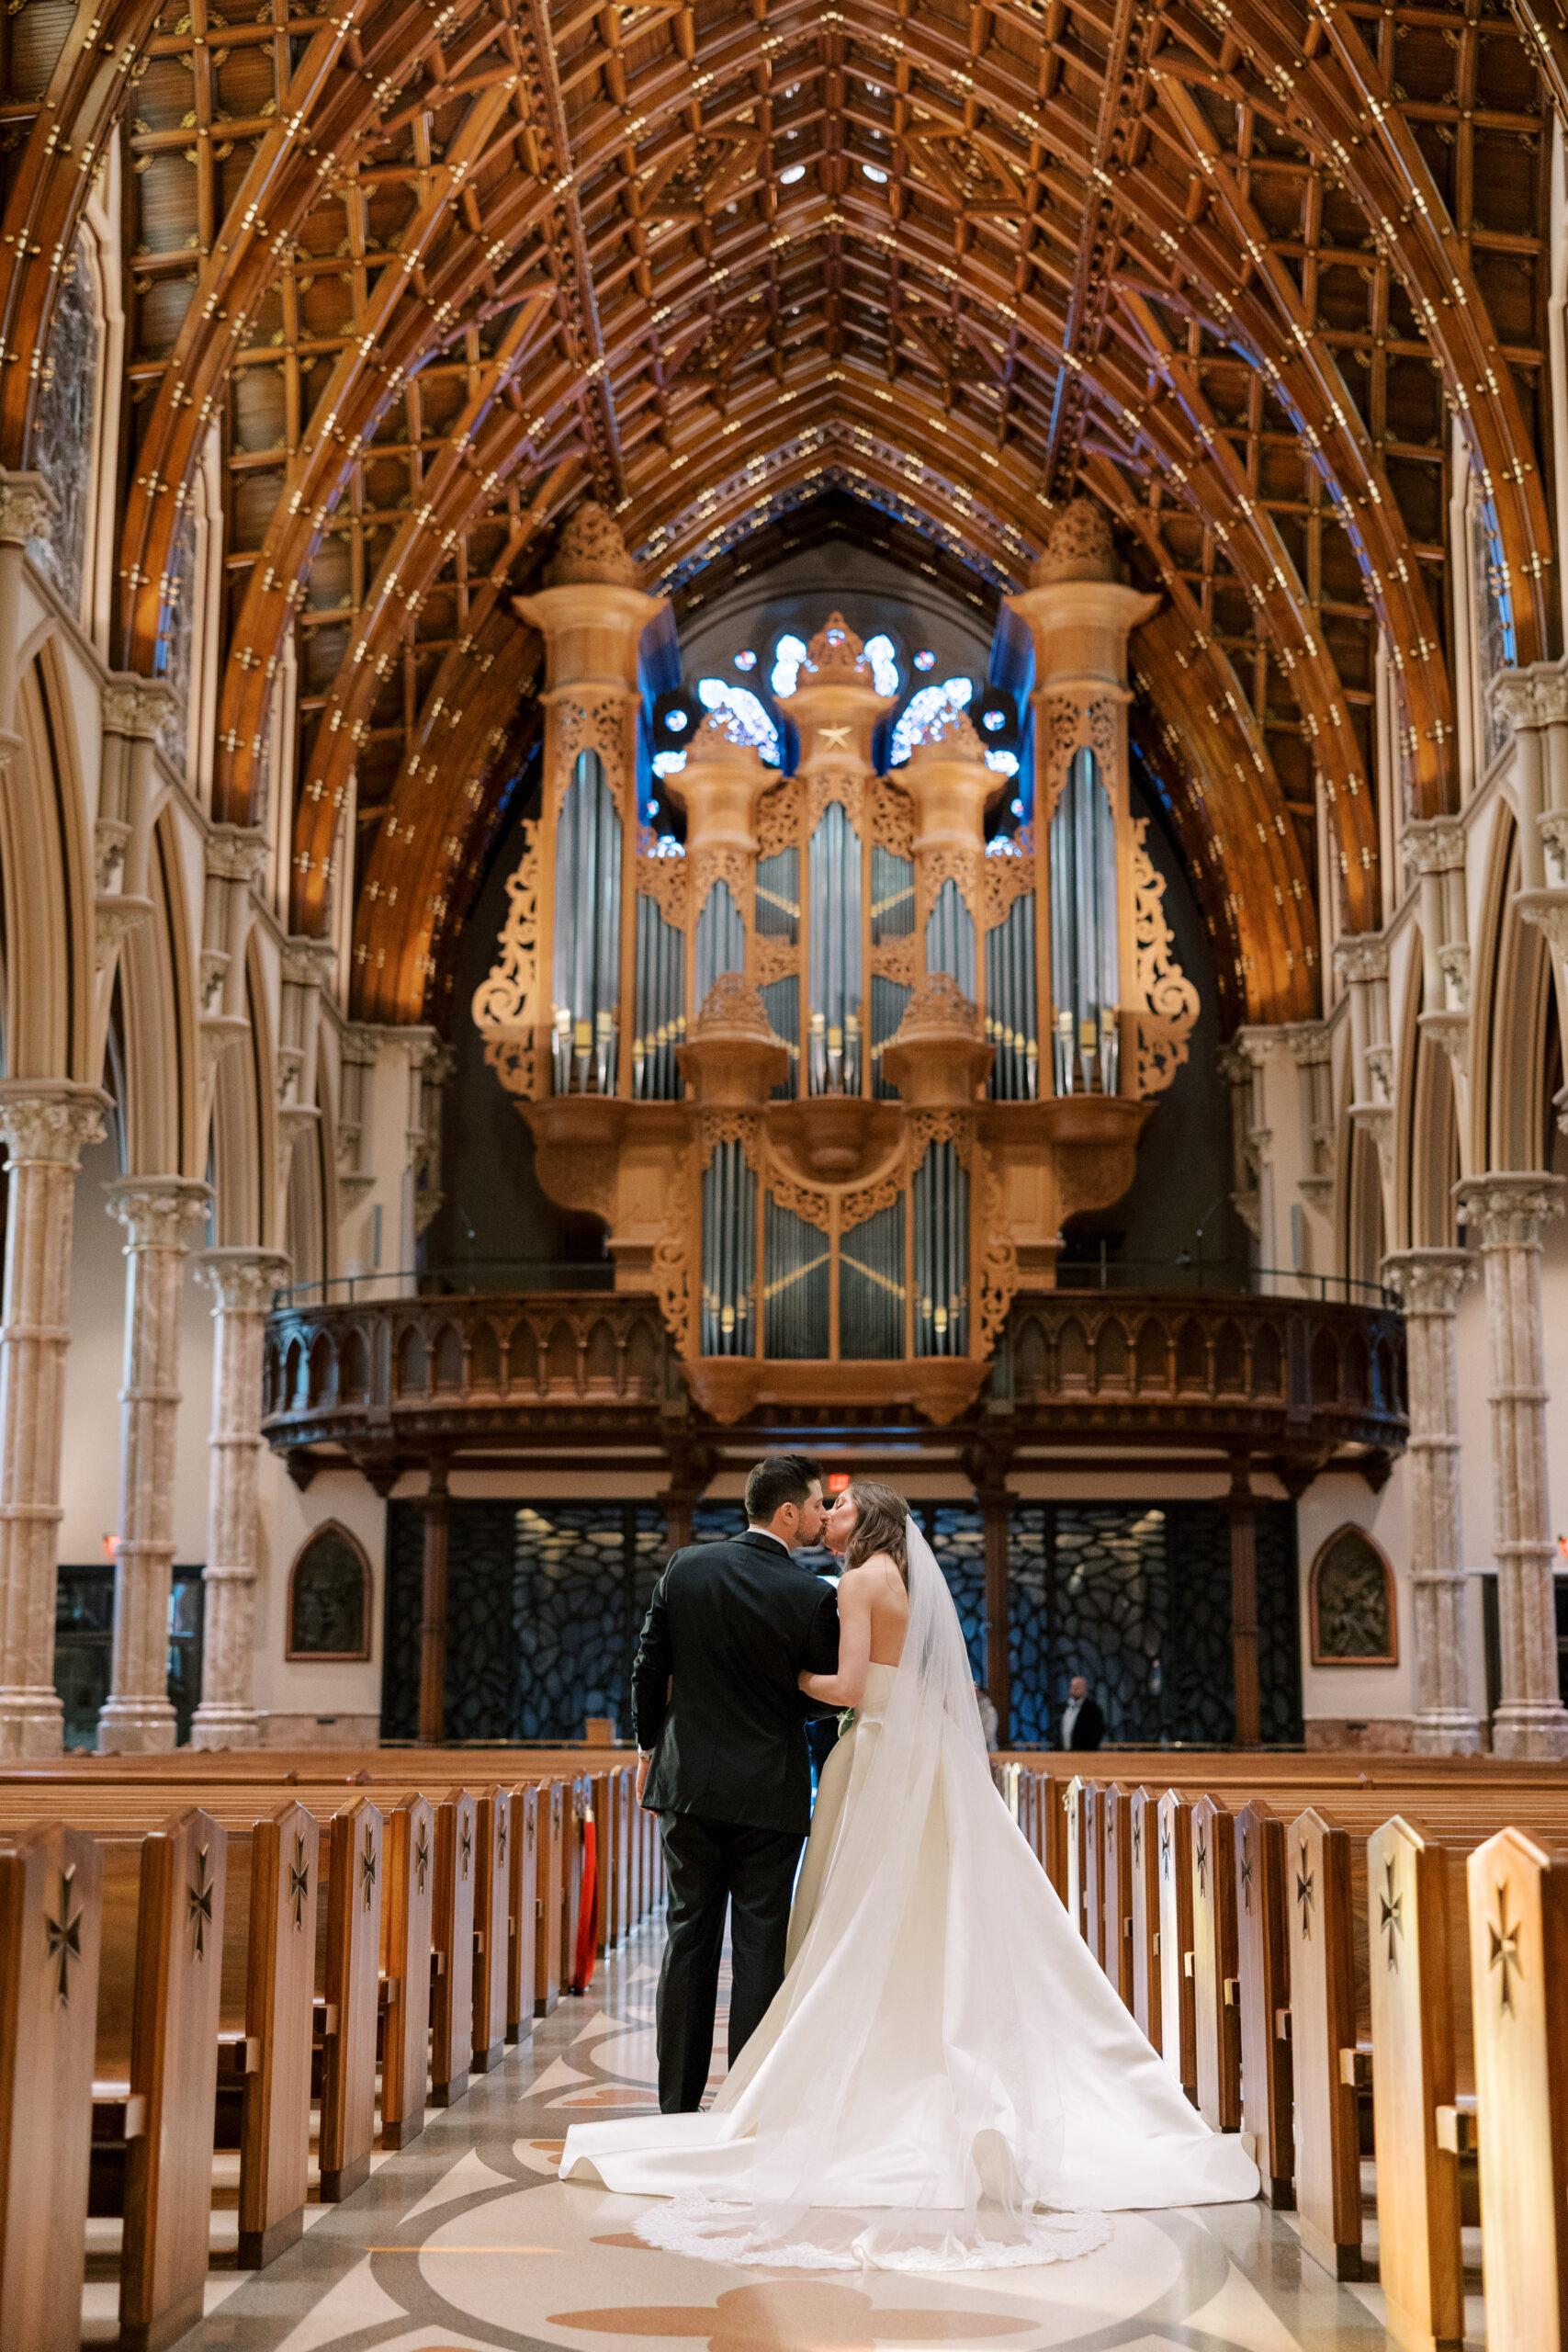 Bride and groom sharing a kiss in the stunning Holy Name Cathedral with a grand organ and vaulted ceilings, during their Blackstone Hotel wedding, planned by Chicago wedding planner Savoir Fête.